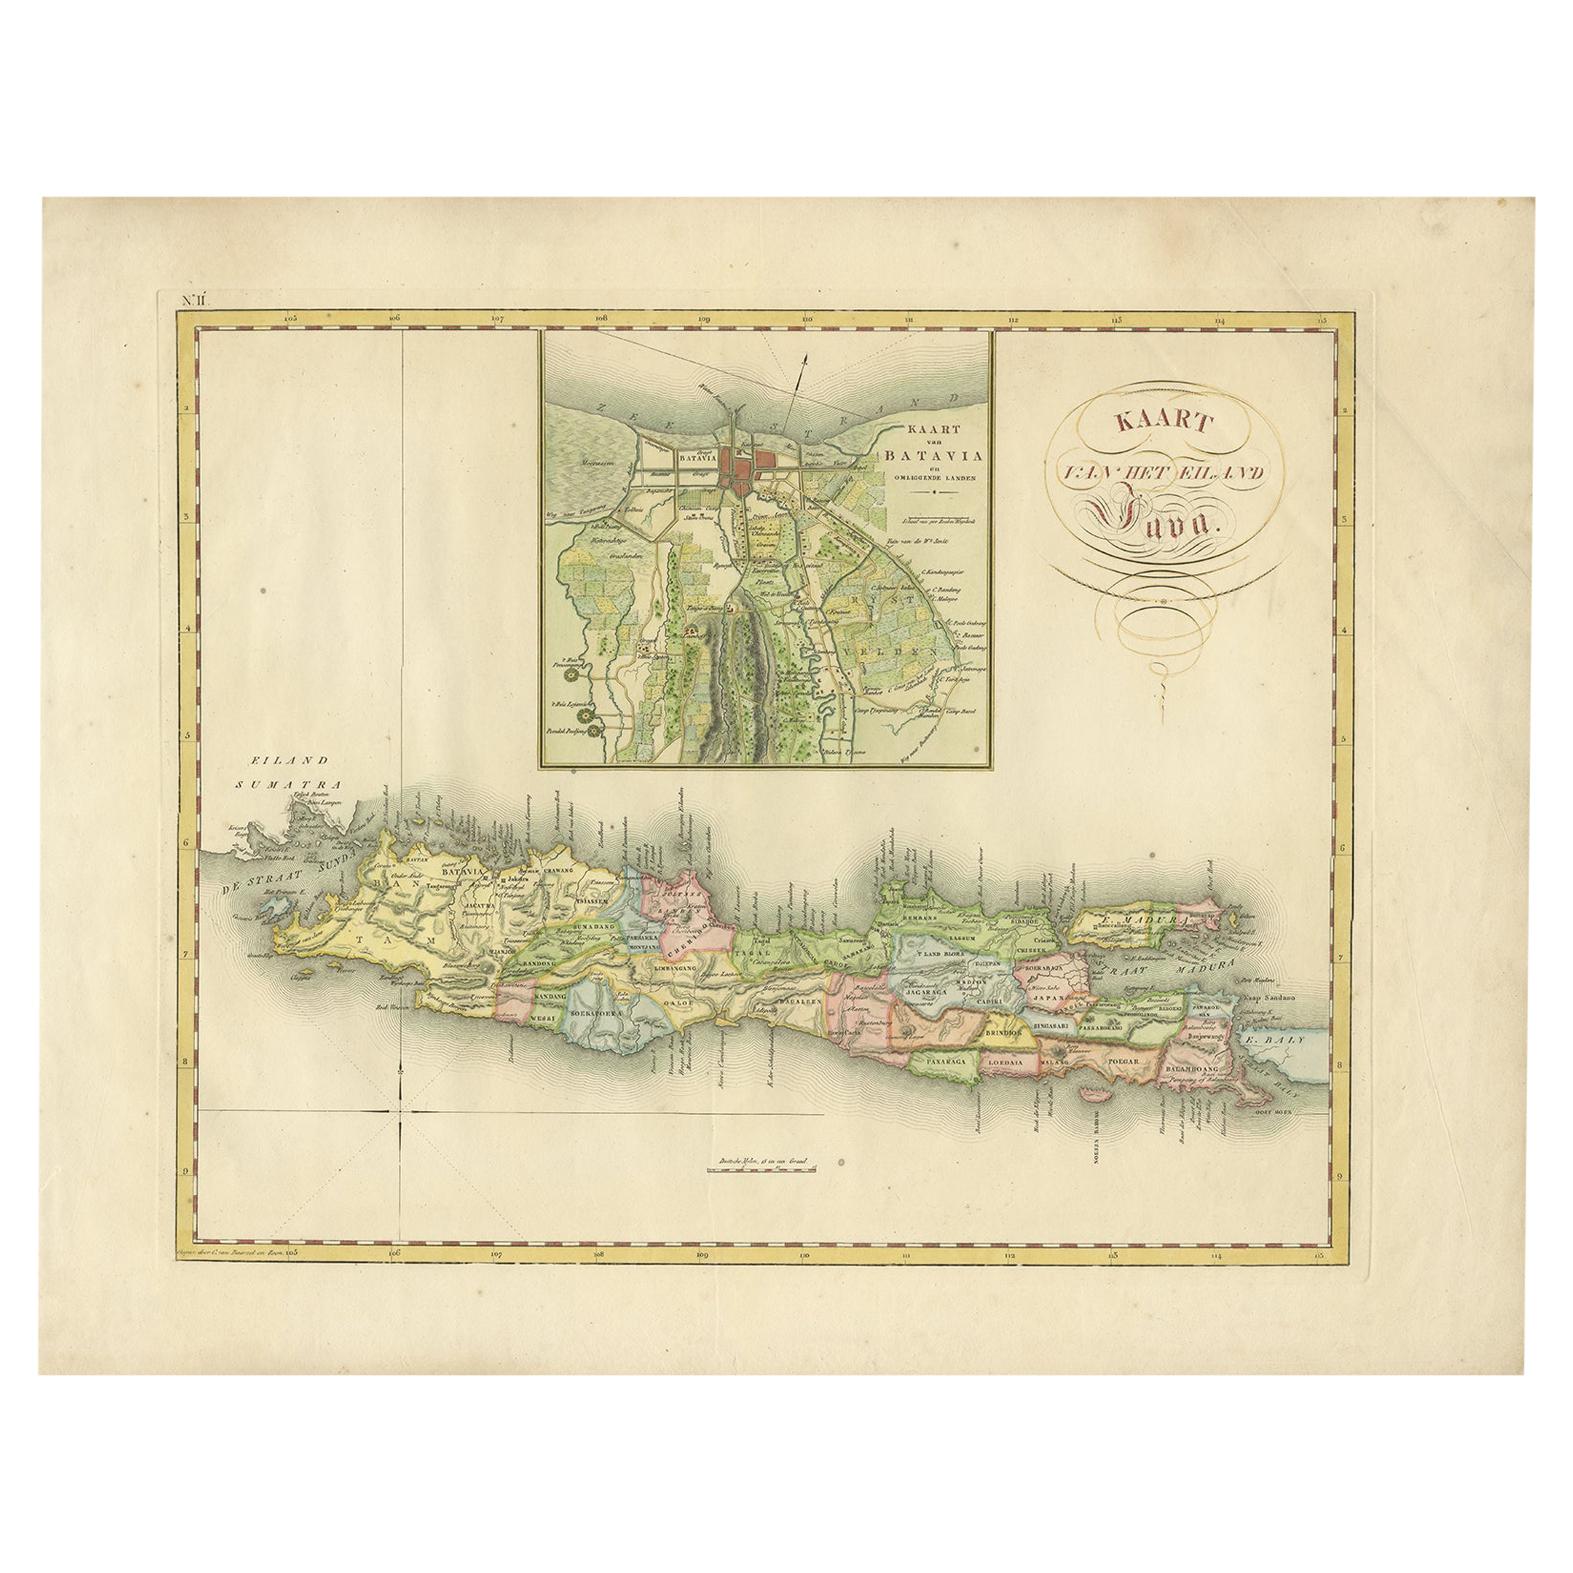 Antique Map of Java and Batavia of nowadays Indonesia, '1818'